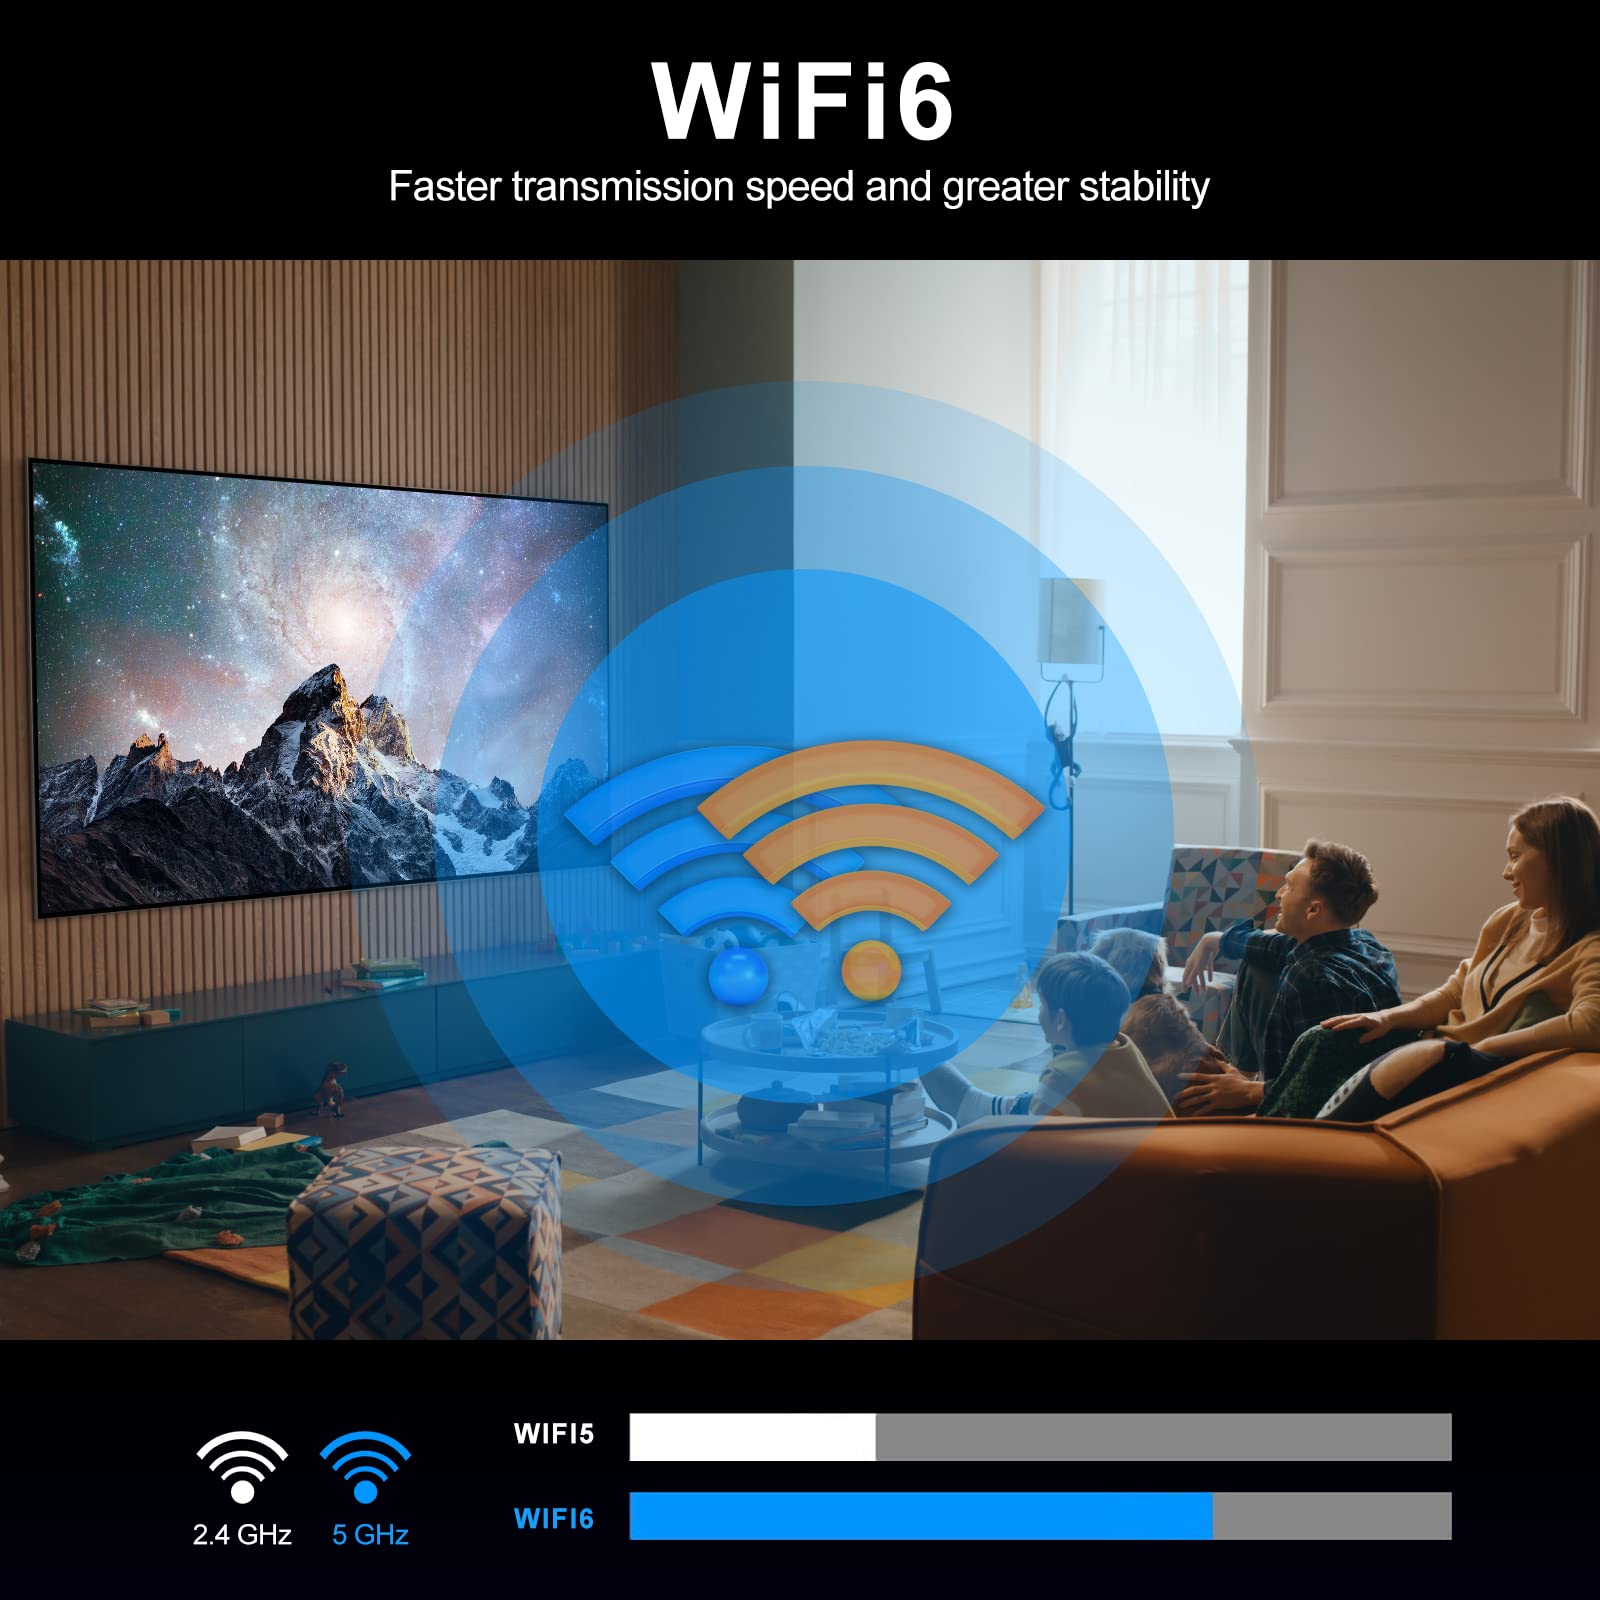 Upvivi Android 13.0 TV Box,Smart Box 4GB 64GB with Mini Backlit Wireless Keyboard with RK3528 Quad-core 64bit,8K Android Box Supports WiFi6 2.4GHz/5.0GHz Bluetooth5.0 USB3.0 3D 8K HDR Internet TV Box